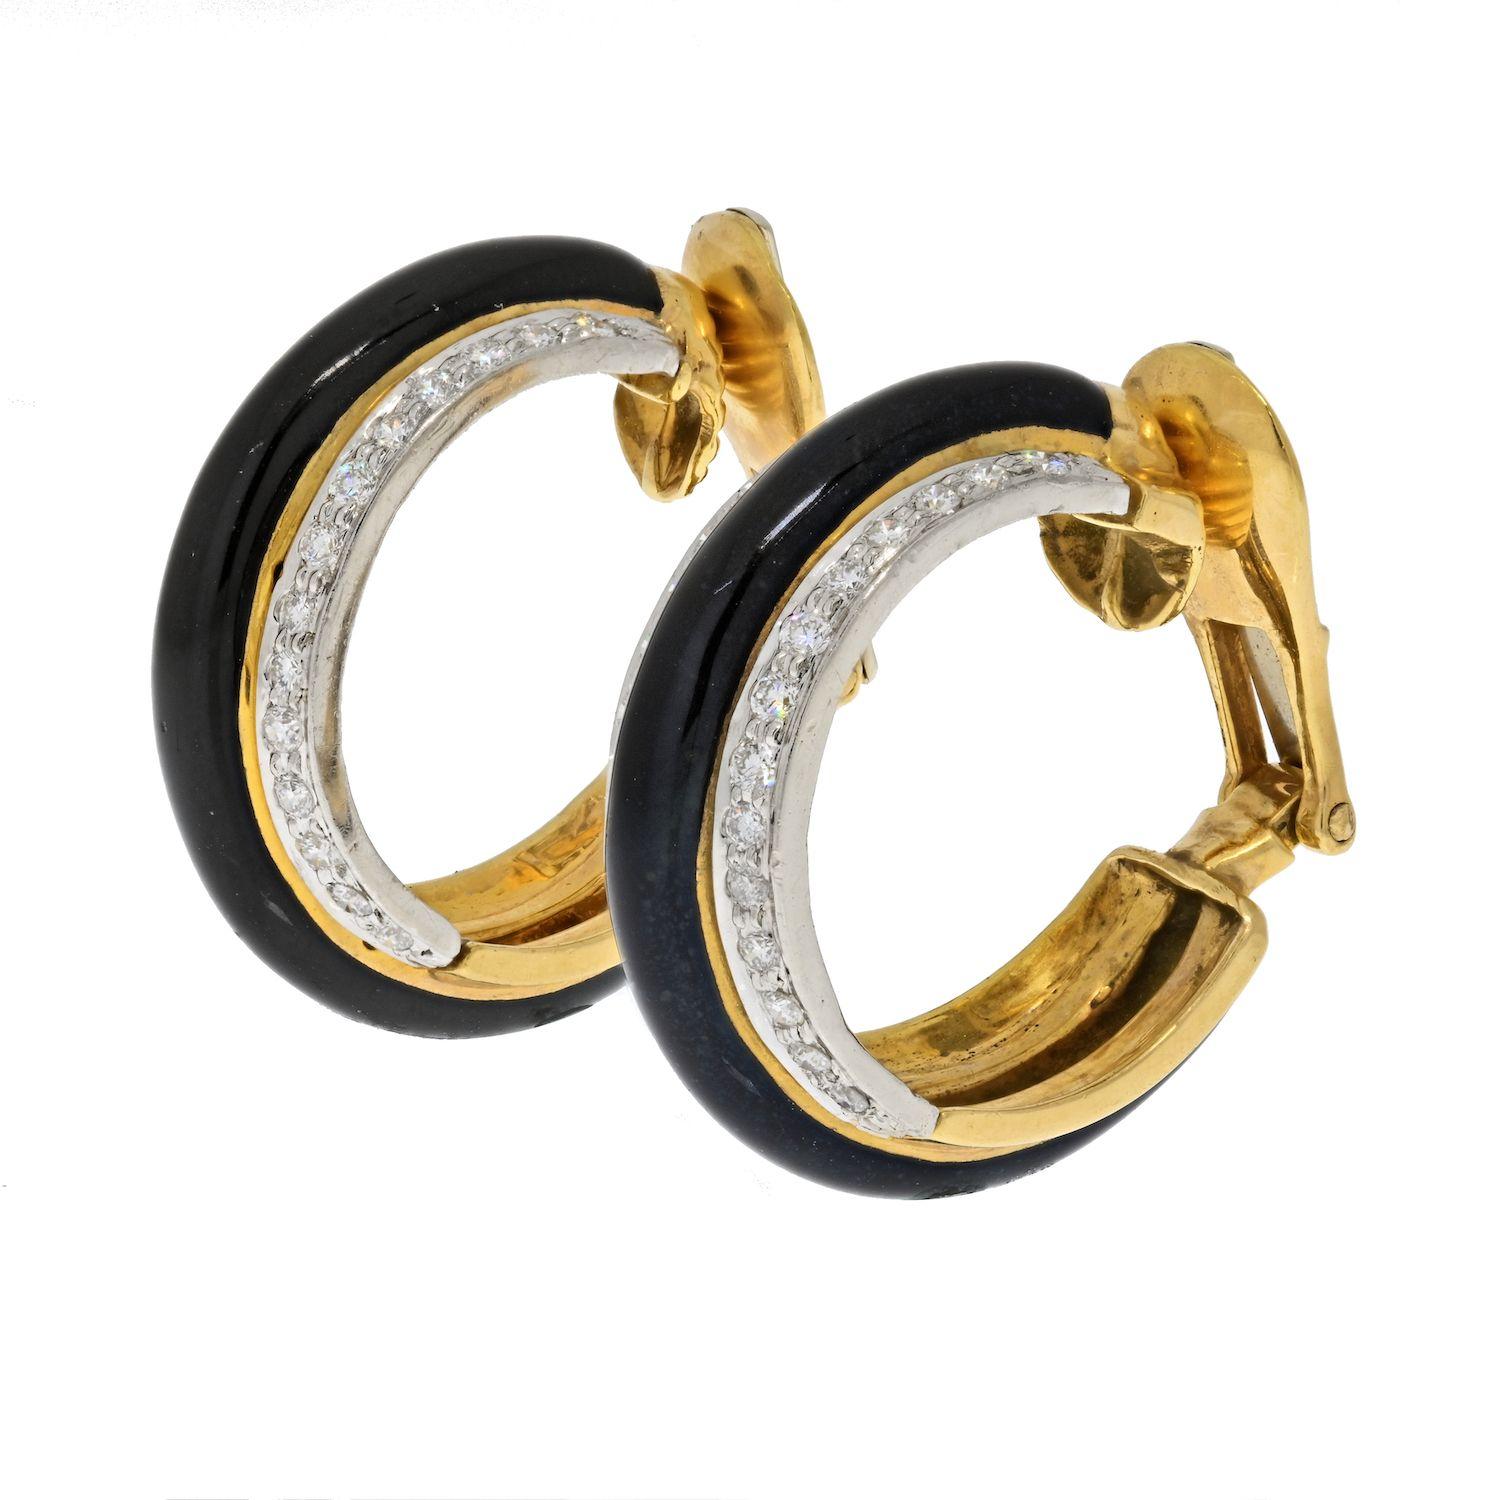 These David Webb earrings are round hoops composed of 18K yellow gold with black enamel and diamonds. The design of these hoop earrings illustrates the creativity of the house of David Webb. Rather than a one row of diamonds David Webb applies bold